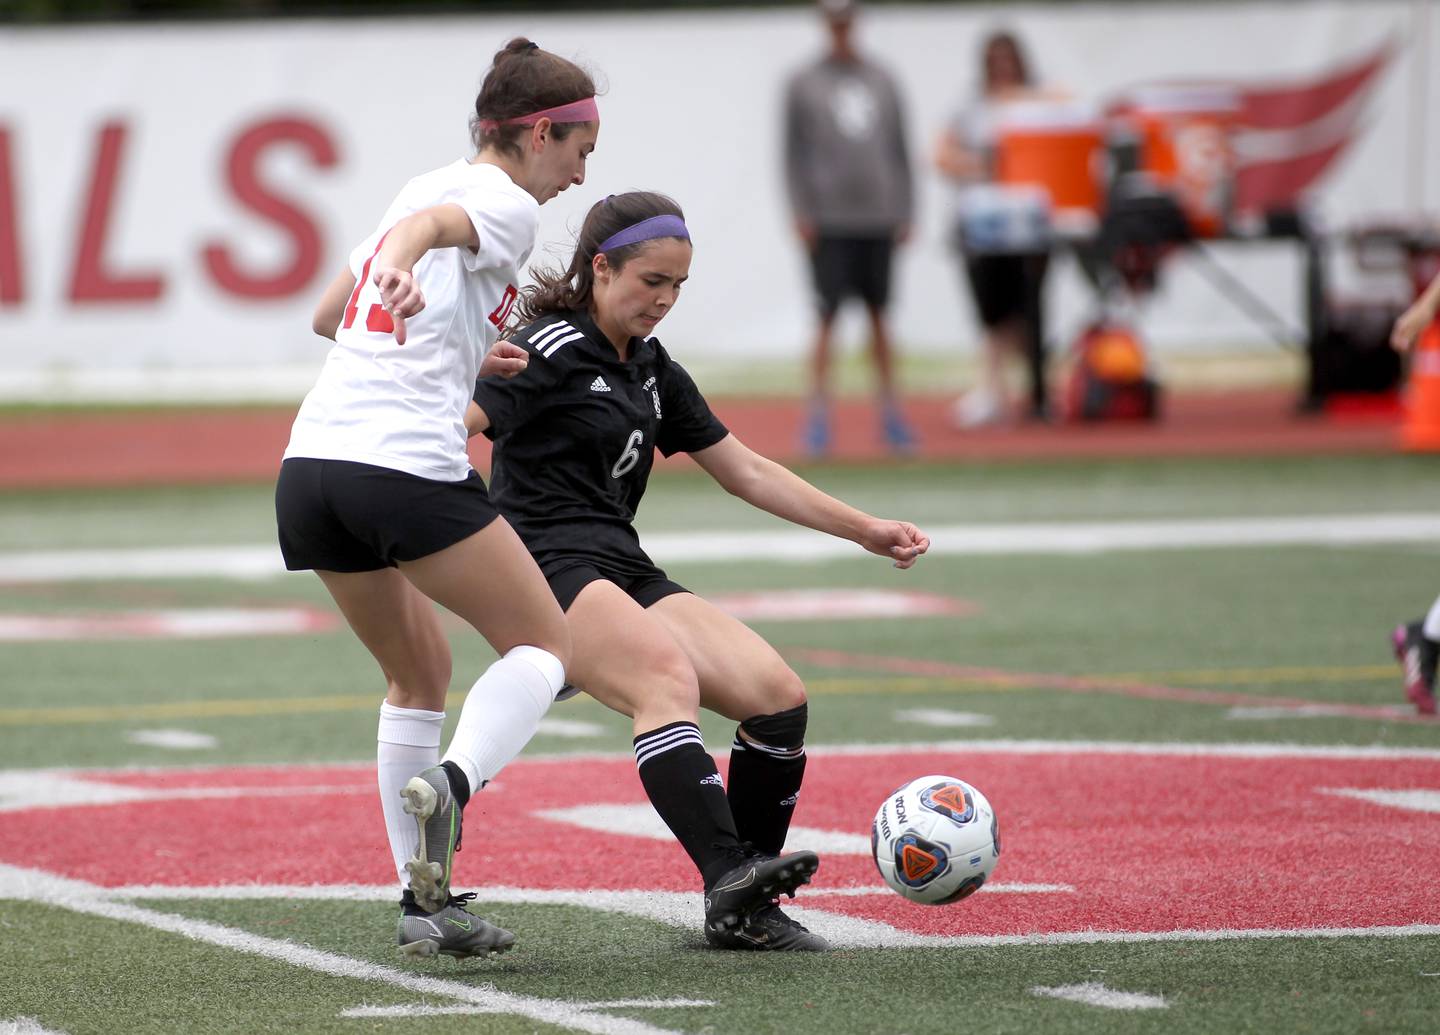 Fenwick's Fiona Roche (6) kicks the ball during their IHSA Class 2A State consolation game against Deerfield at North Central College in Naperville on Saturday, June 4, 2022.